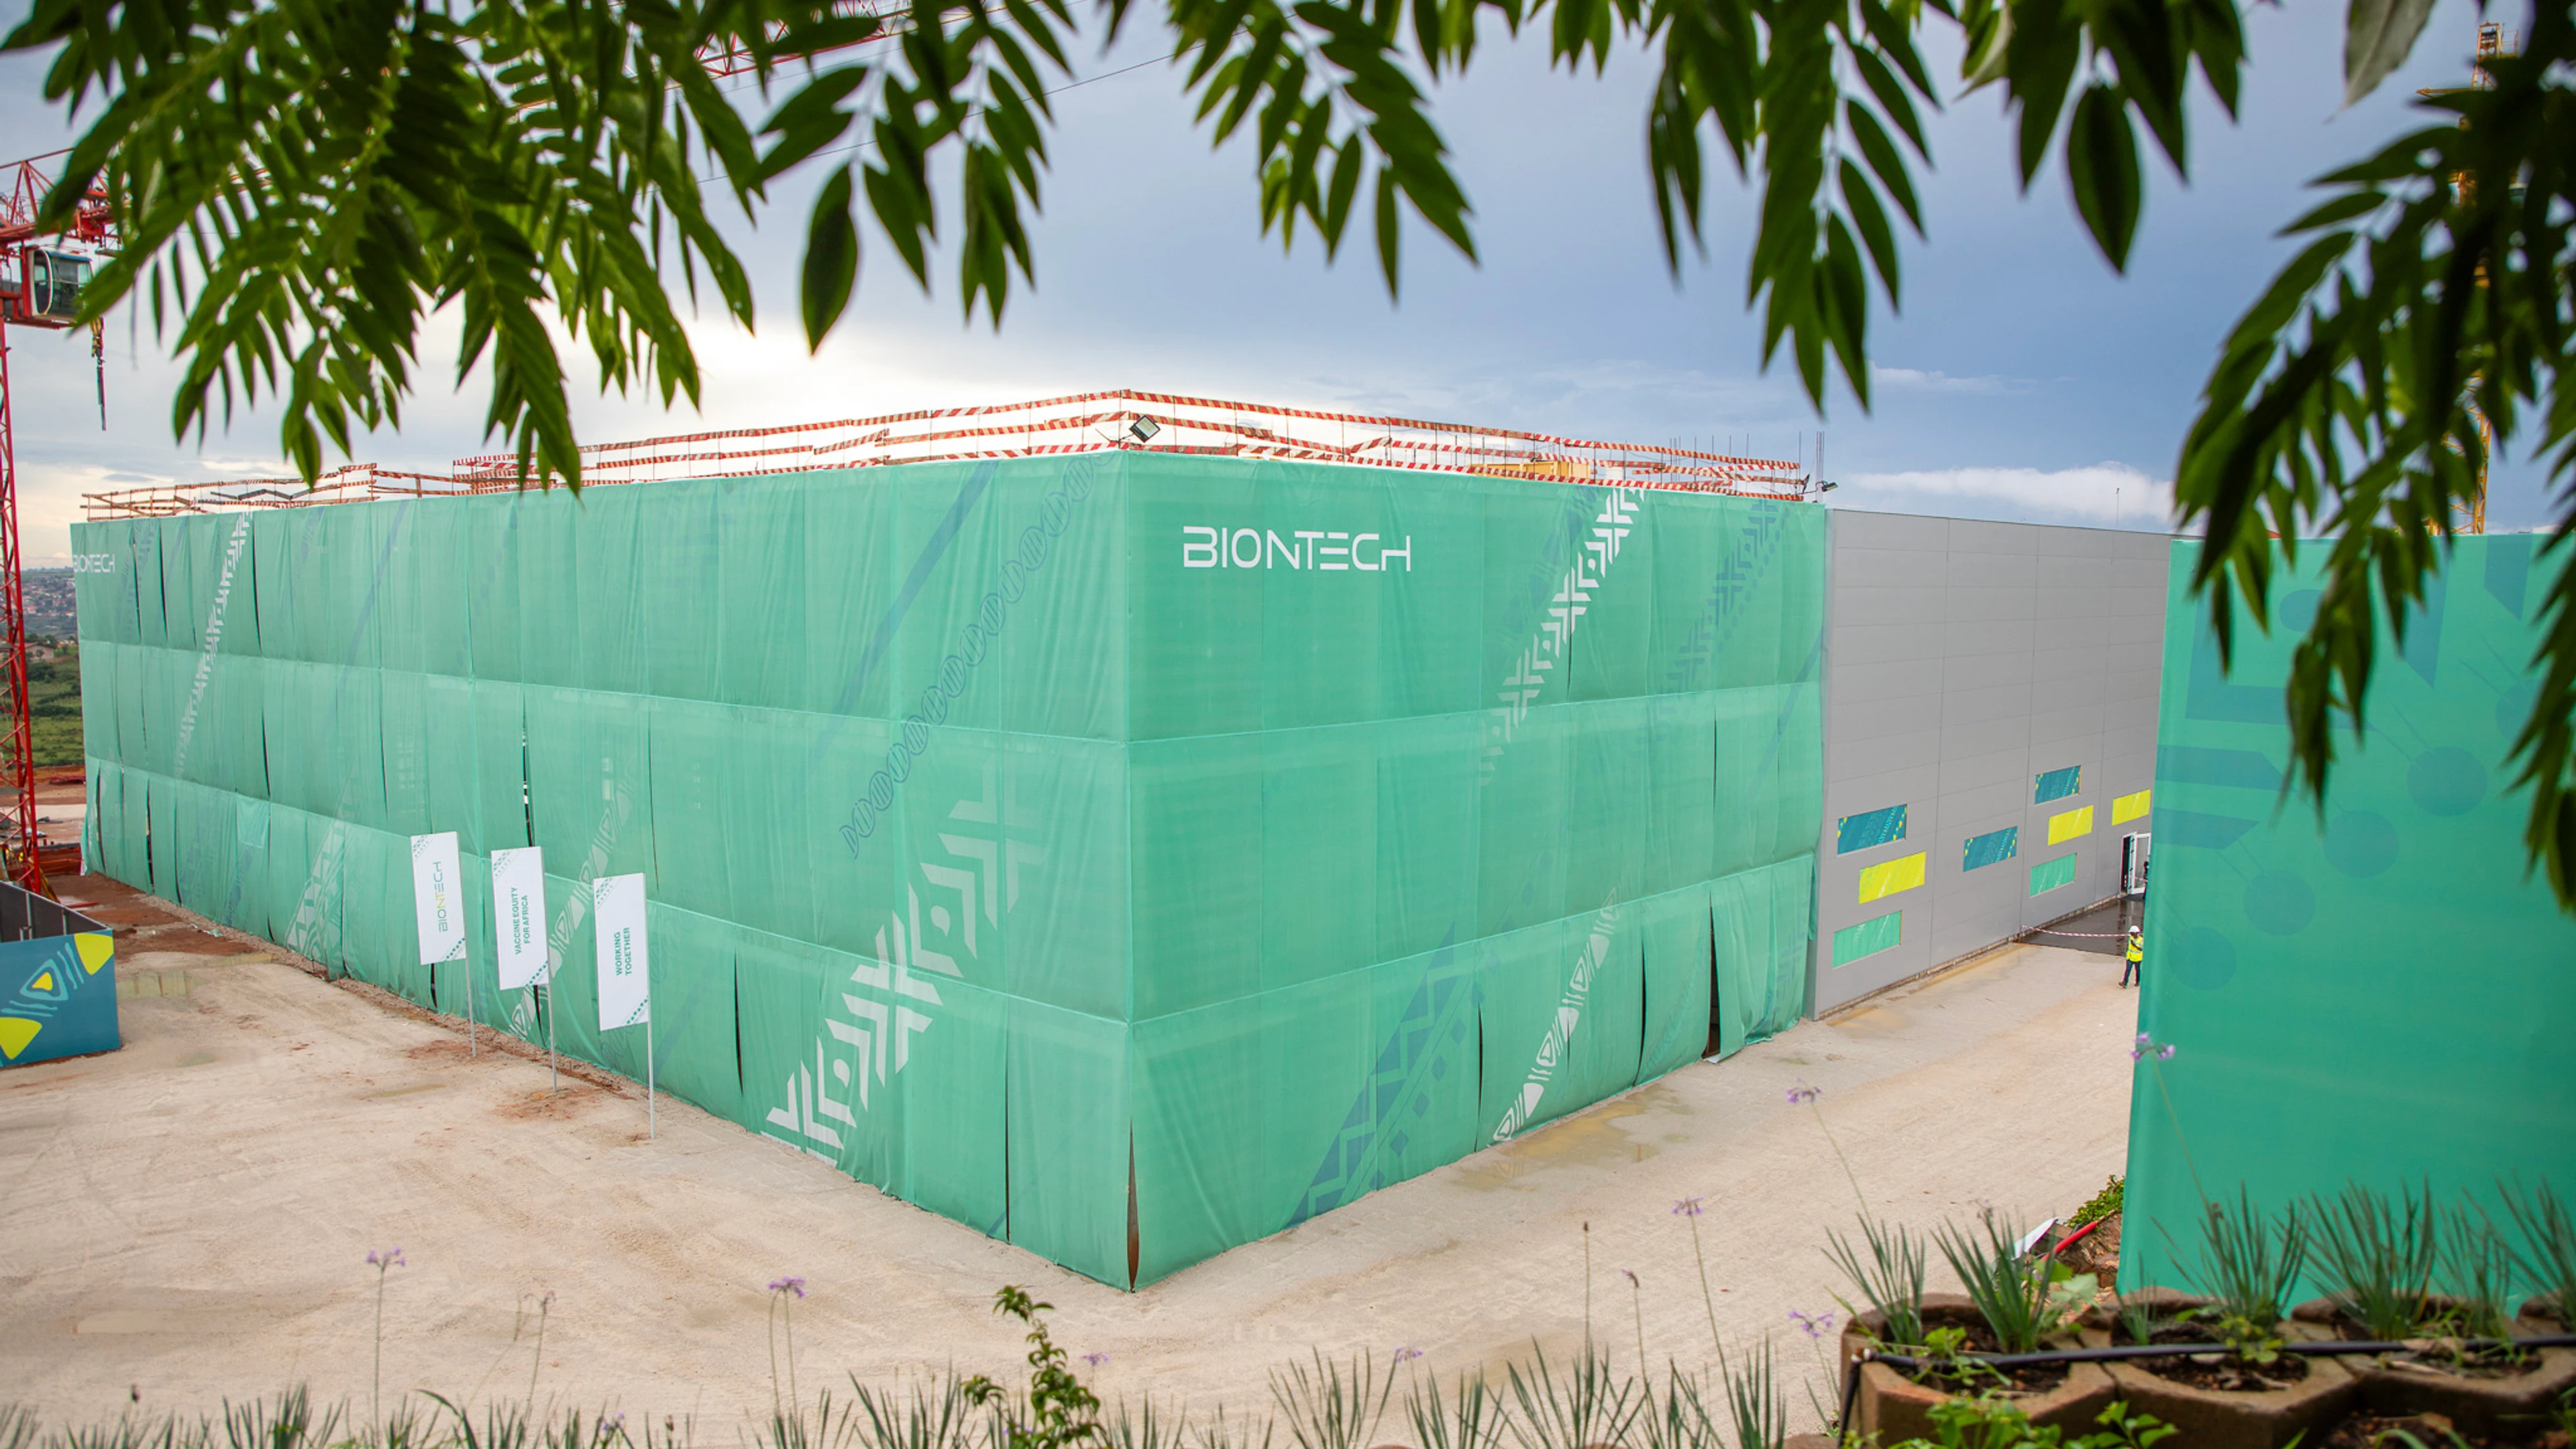 BioNTech mRNA-based vaccine manufacturing site in Kigali